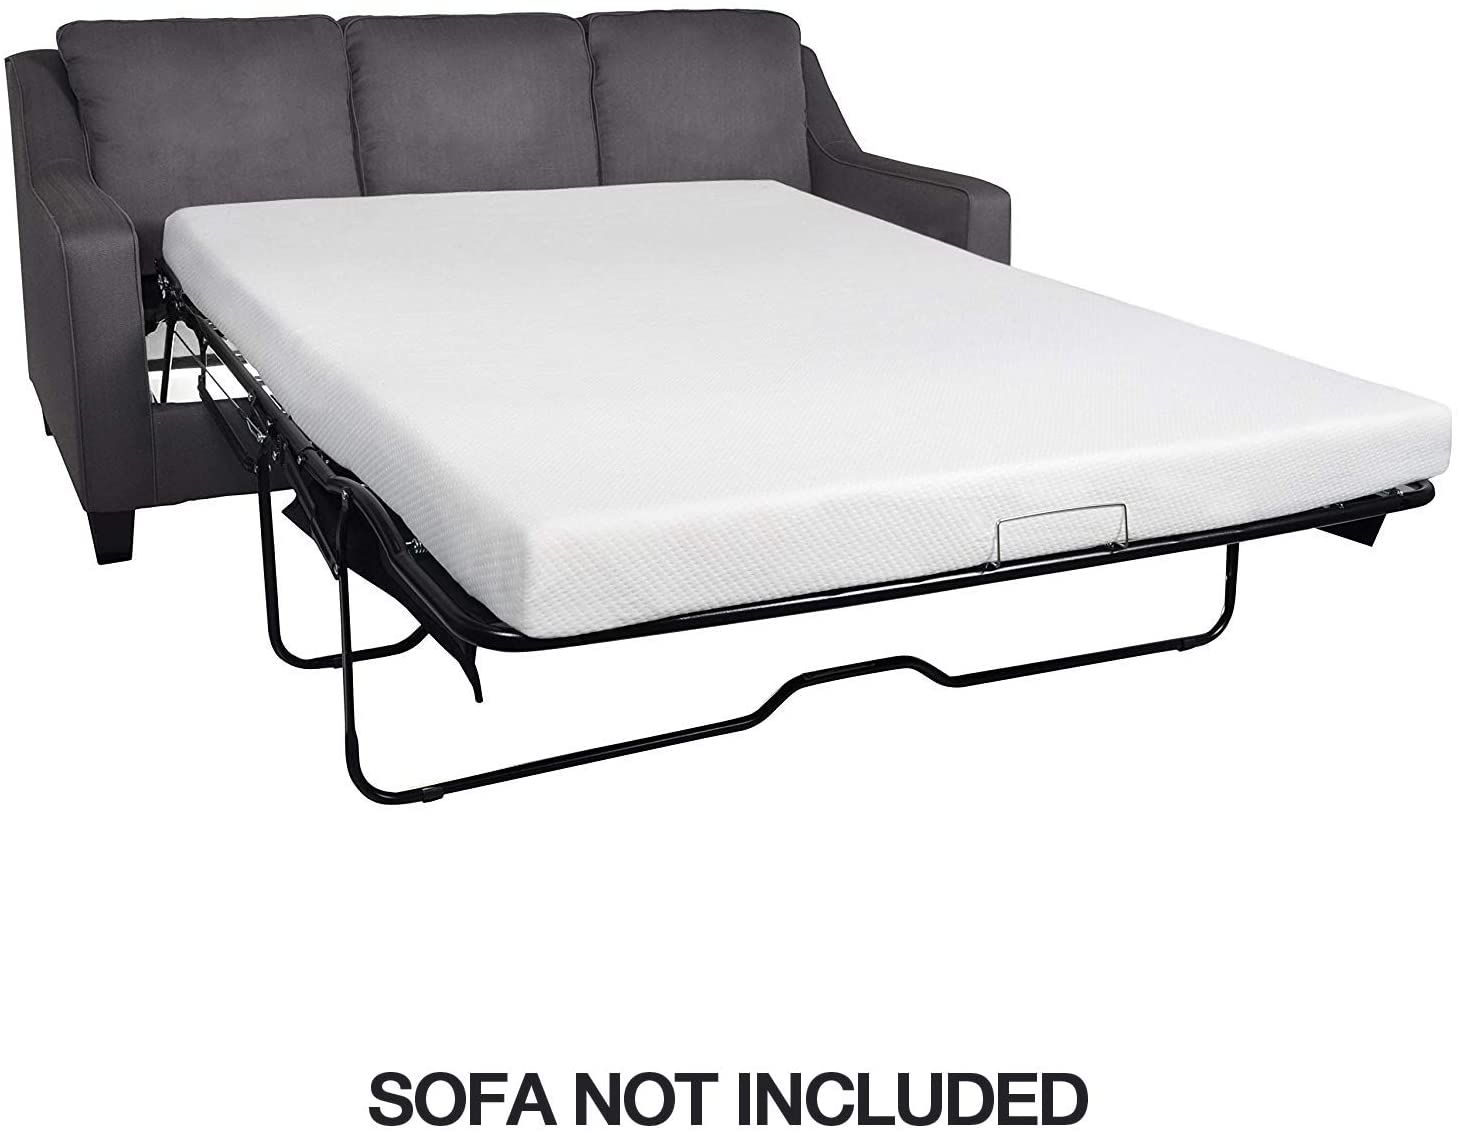 replacement innerspring mattress for sofa bed